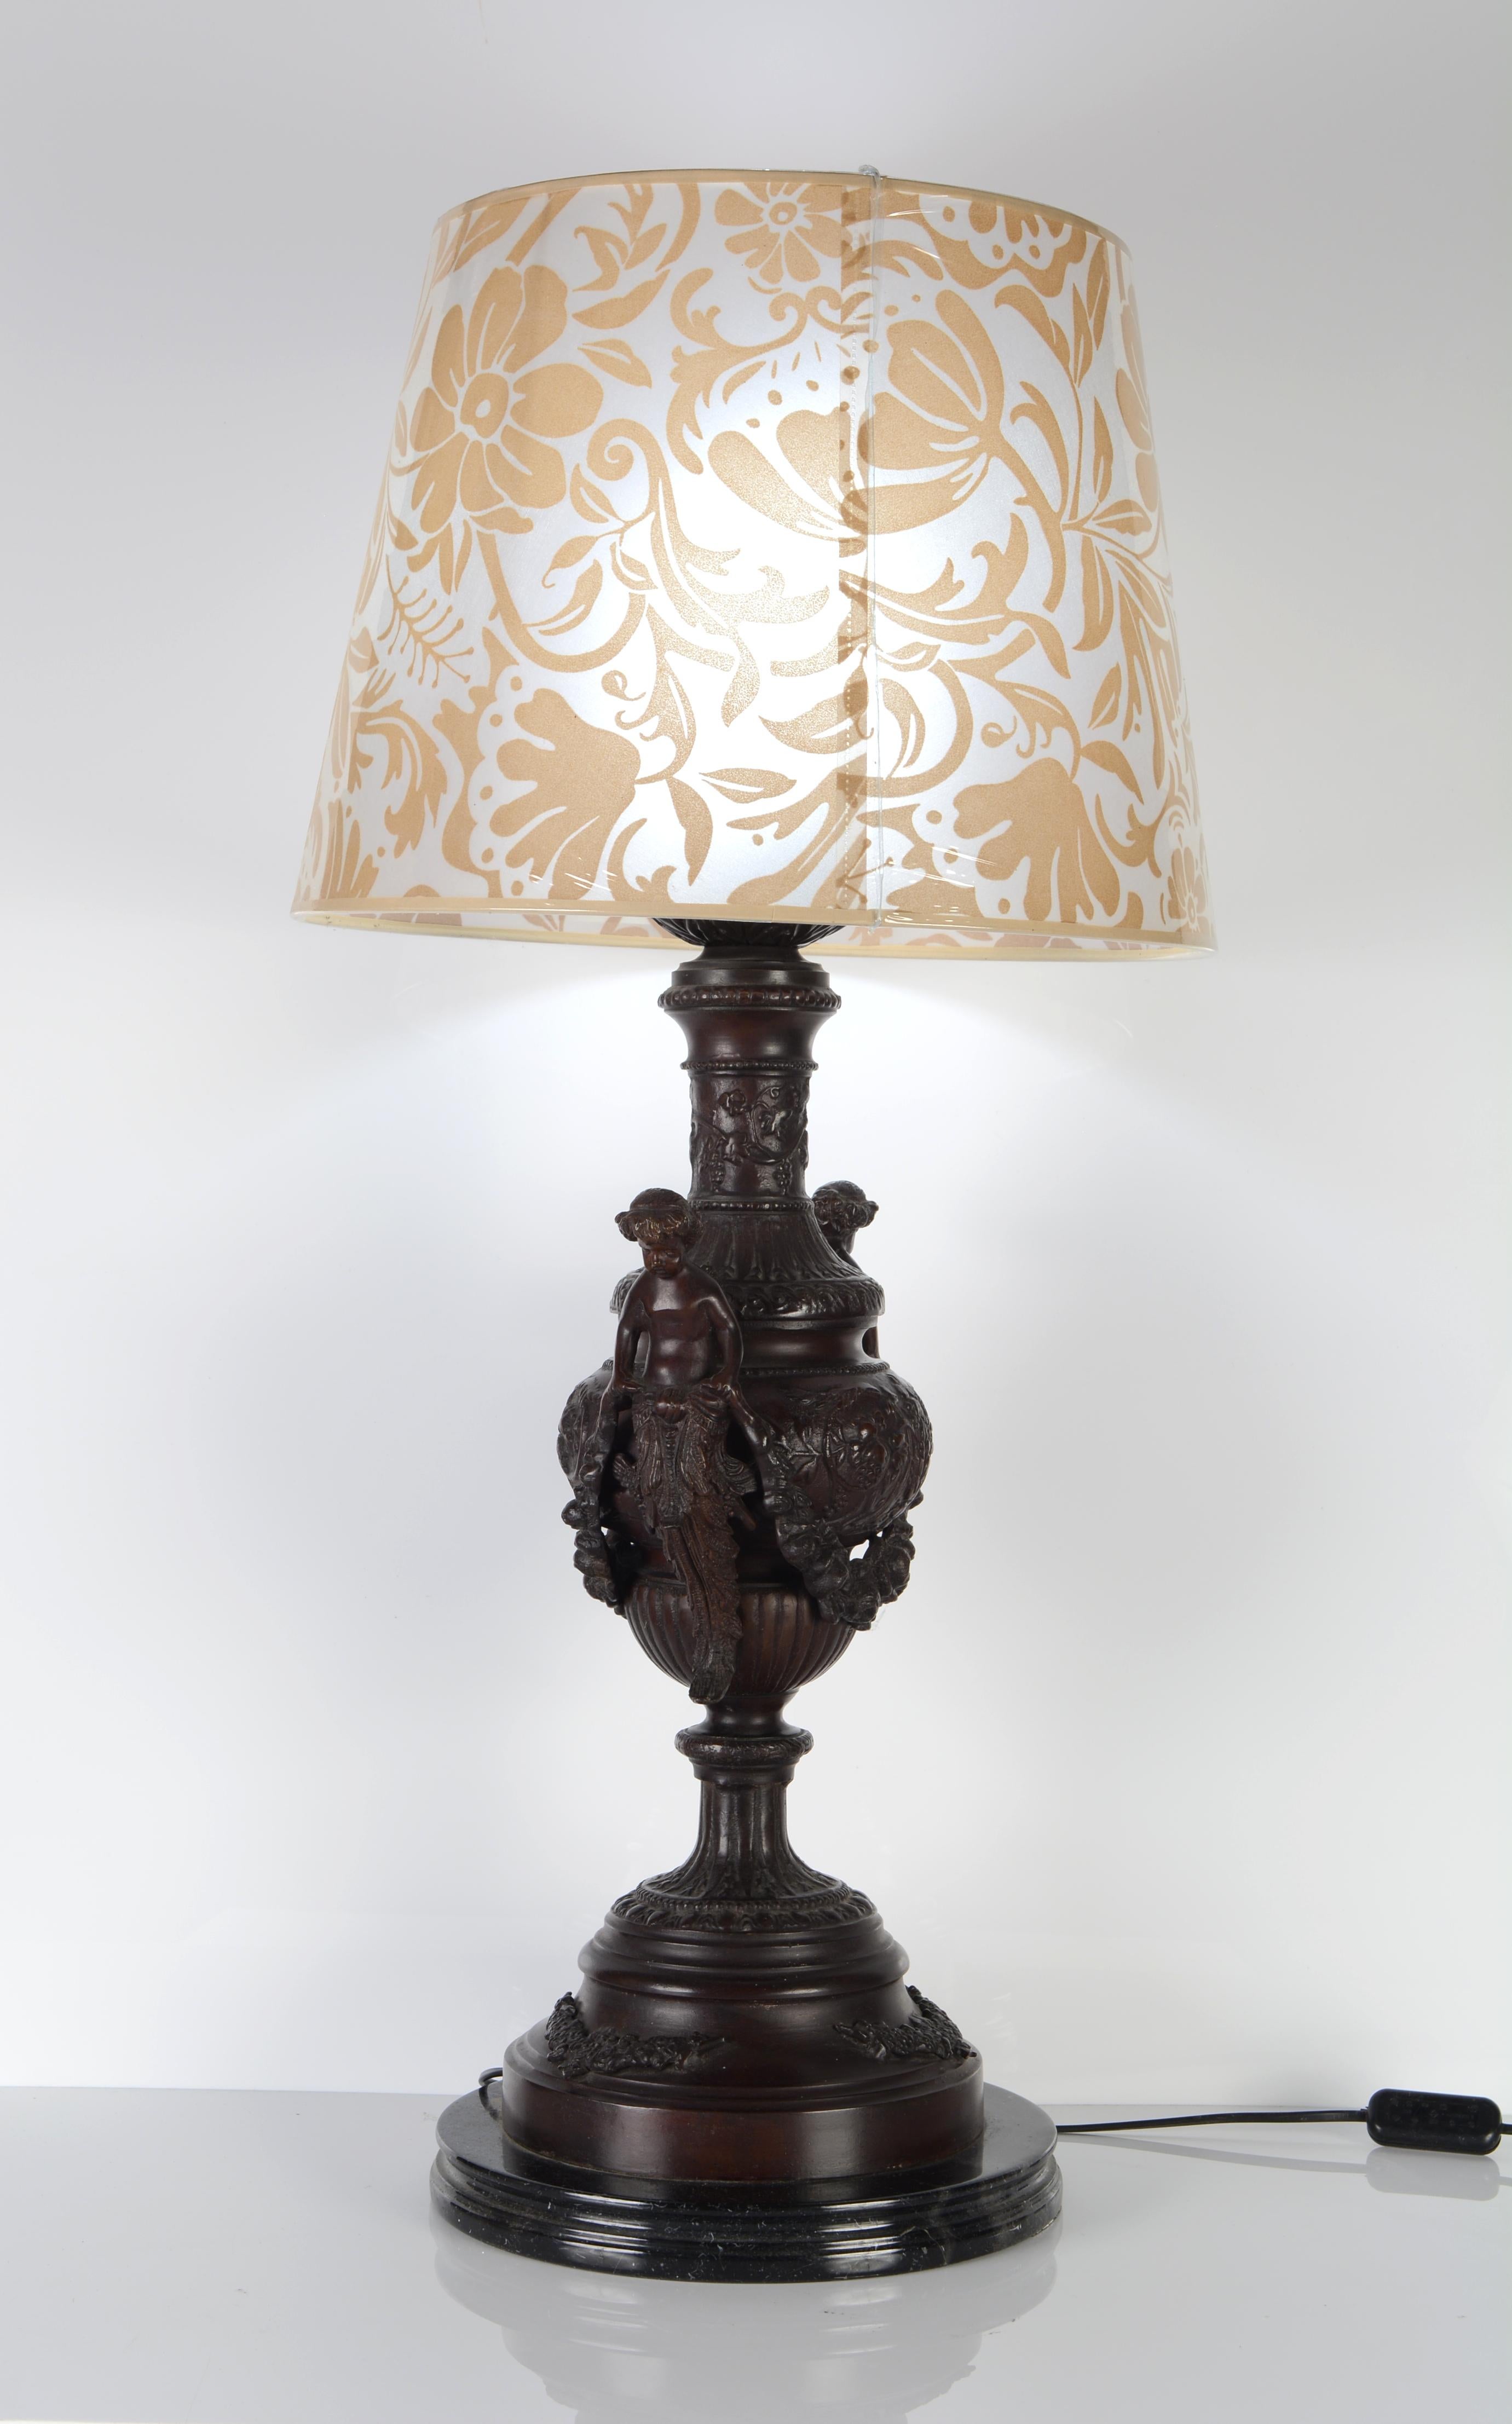 Lamp base with vase and grotesques. Patinated bronze and marble base.
Without display
The round base enhances the lamp base, consisting of a vase decorated with gallons, branches, grapes and vegetable scrolls. On the sides, two grotesques made up